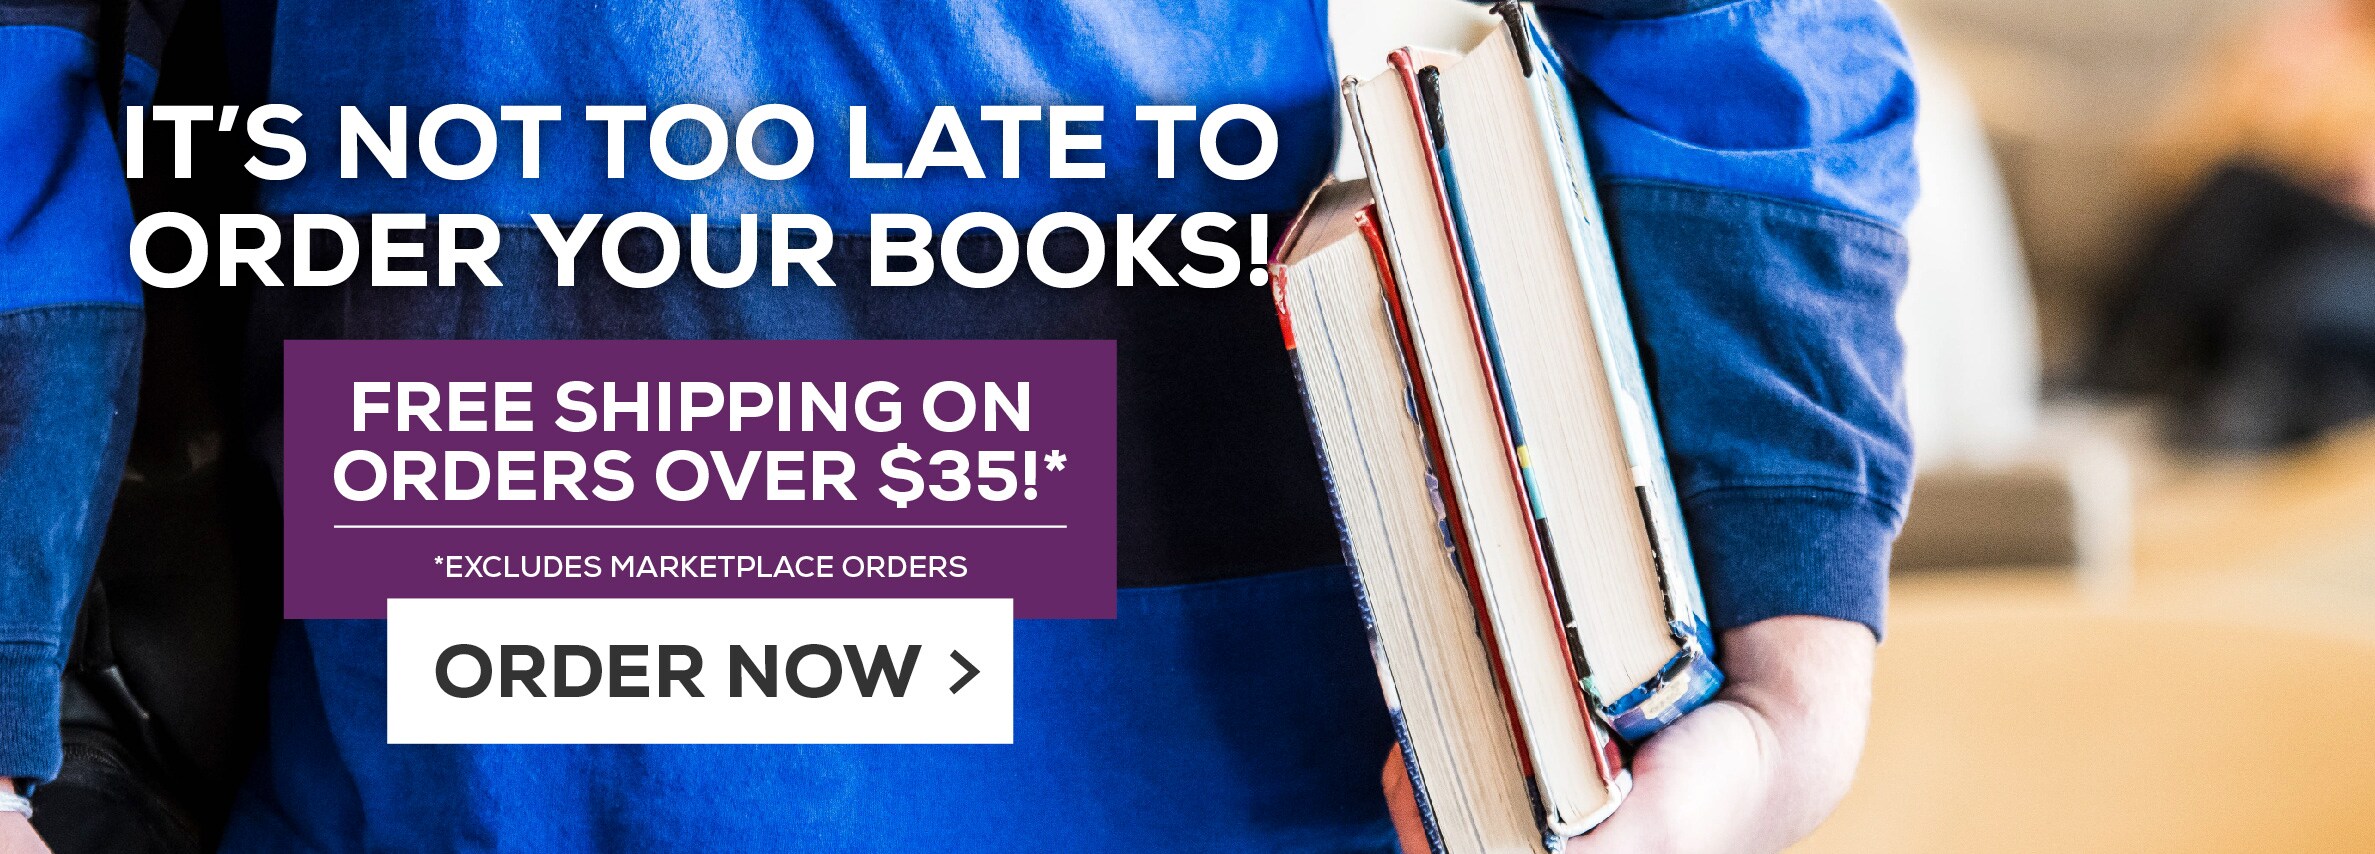 Itâ€™s not too late to order your books! Free shipping on all orders over $35!* Excludes marketplace purchases. Order Now.